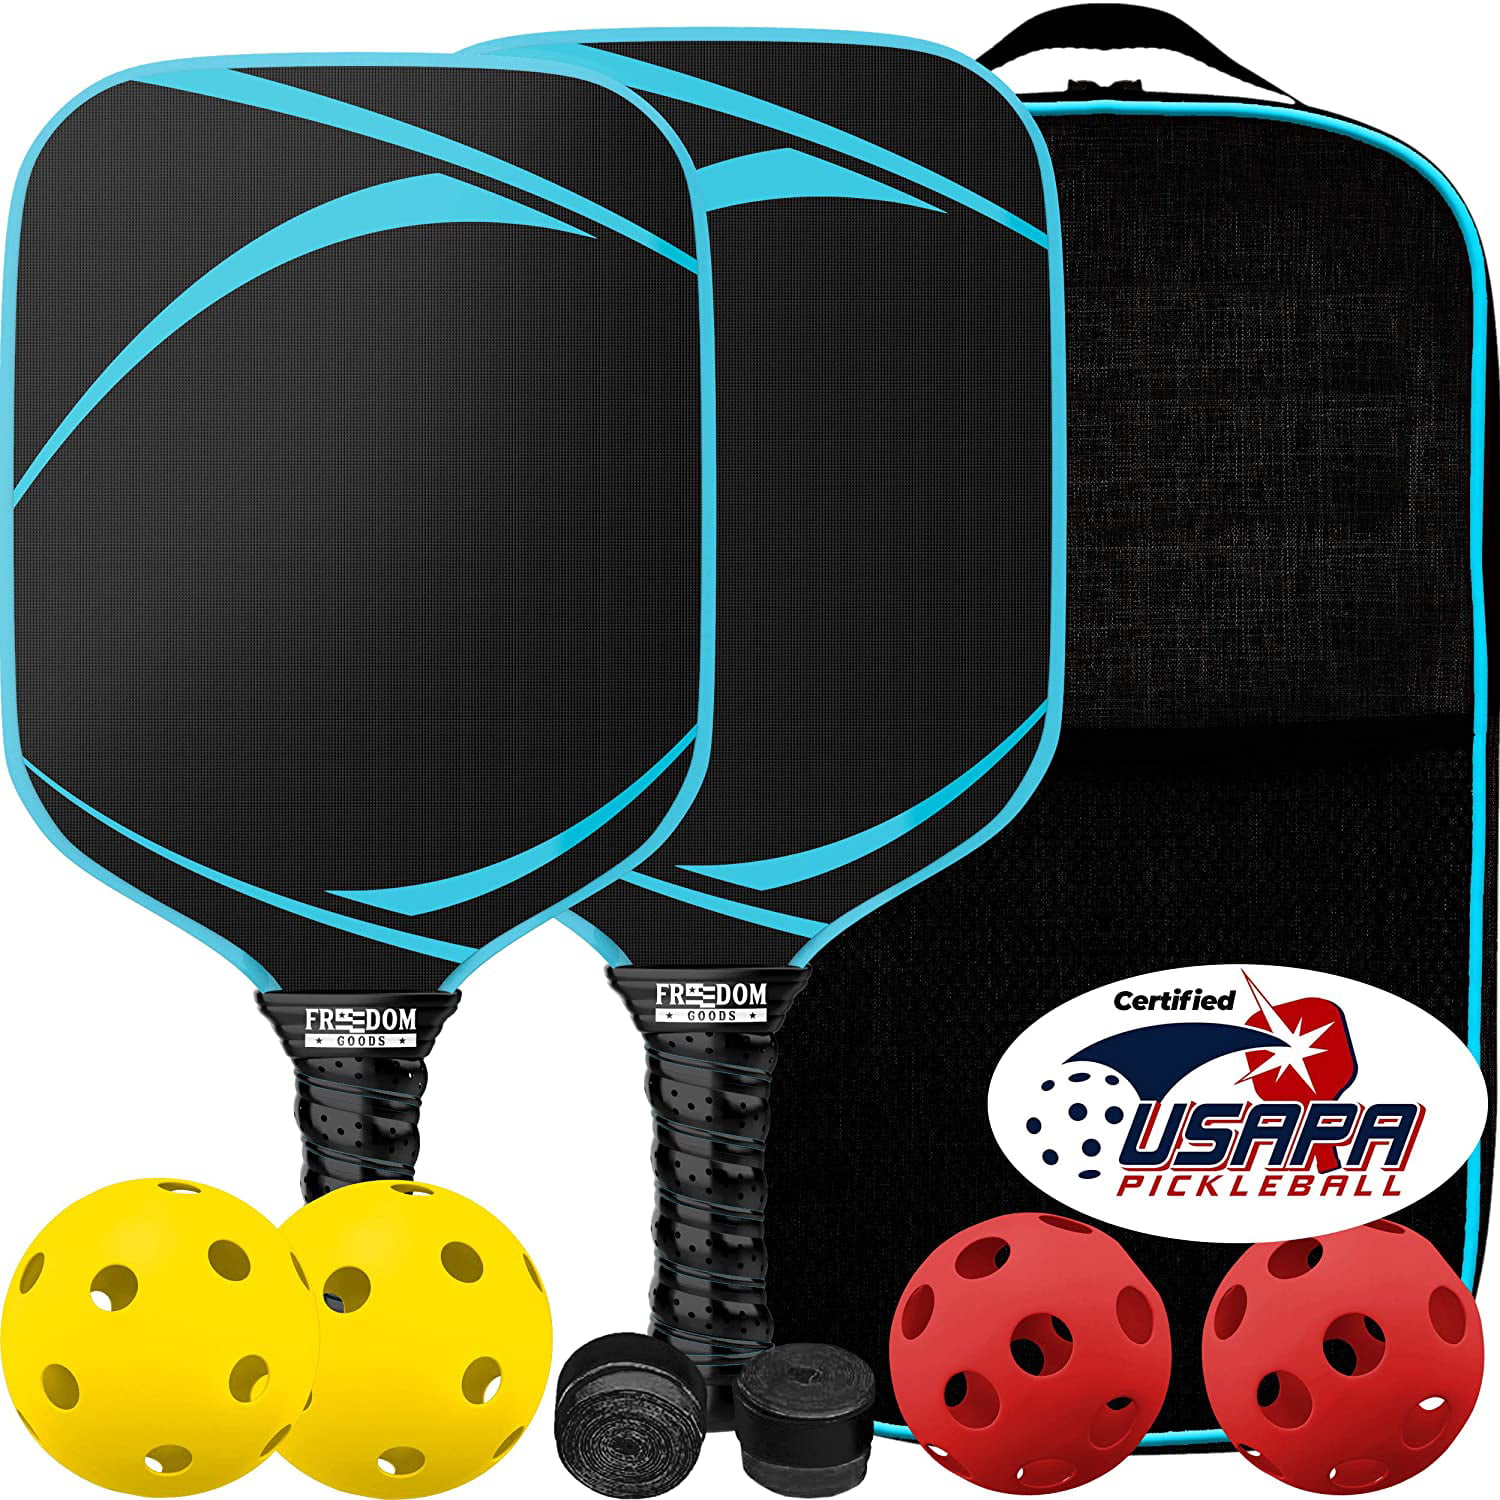 Wrist Band NEW Graphite Pickleball PP Paddle Set 2 with 4 balls and Storage Bag 